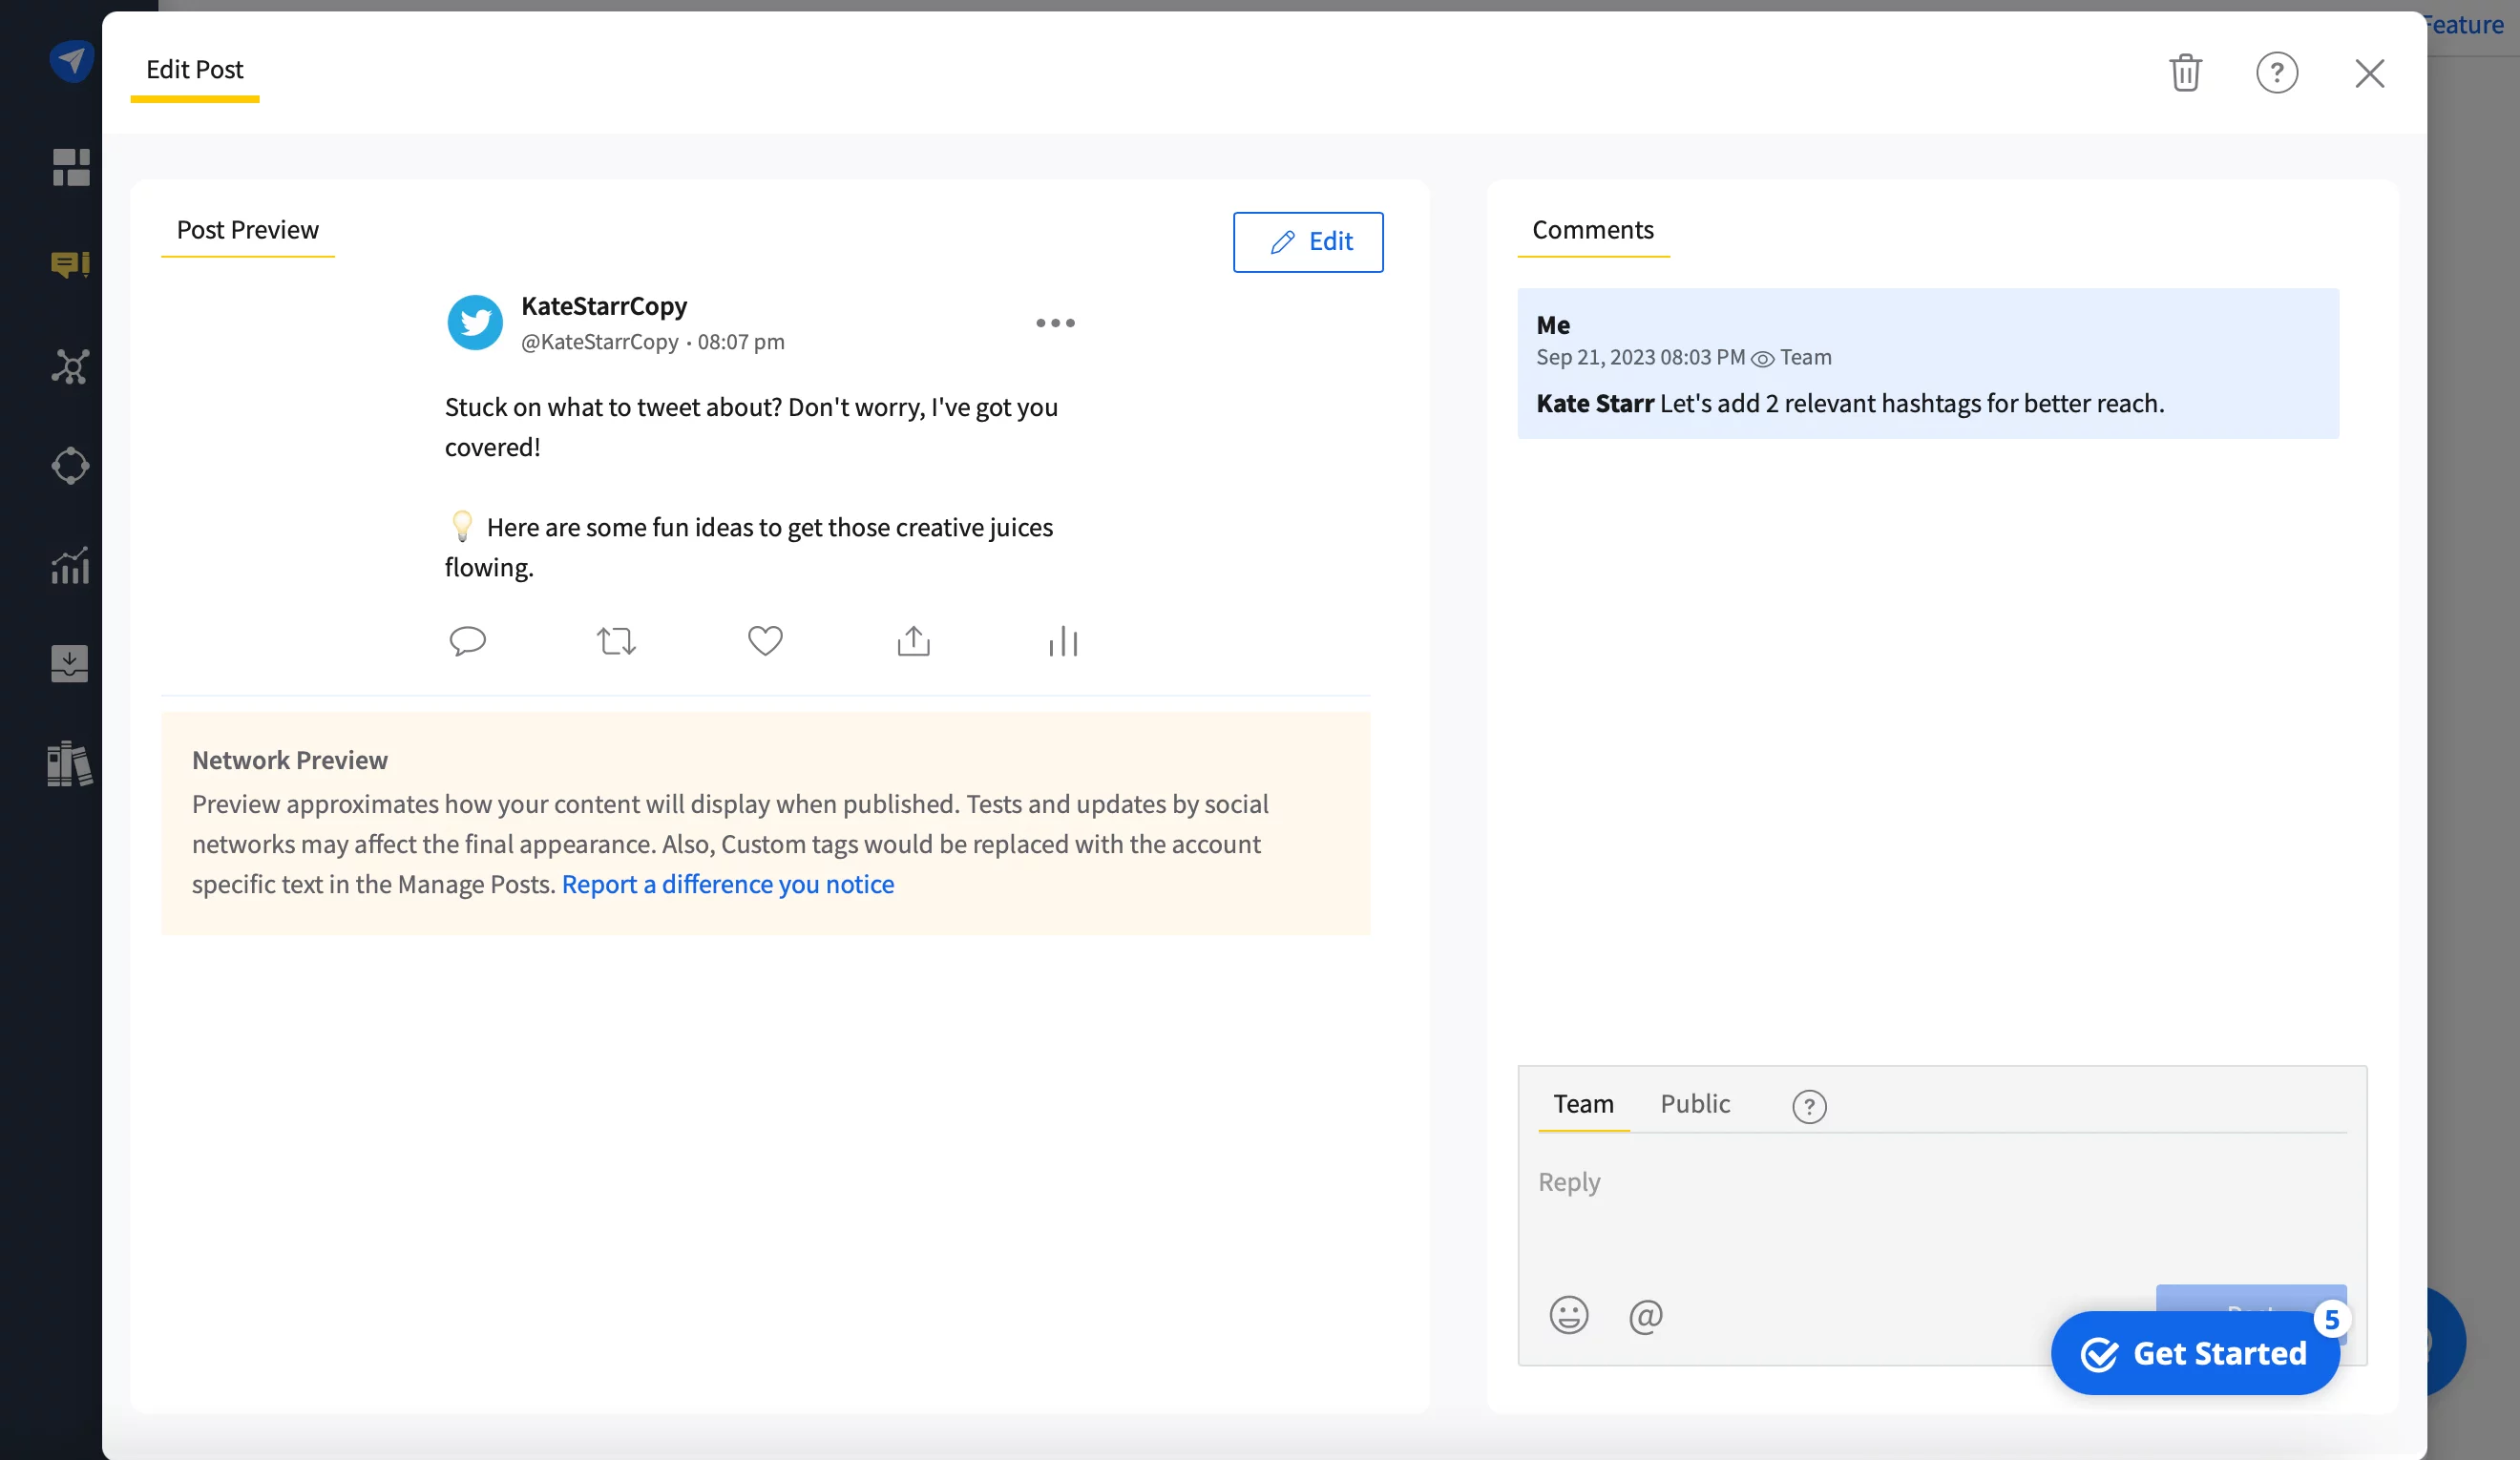 Twitter post preview in social pilot, showing right sidebar with a comment and the option to add more Team or Public comments.